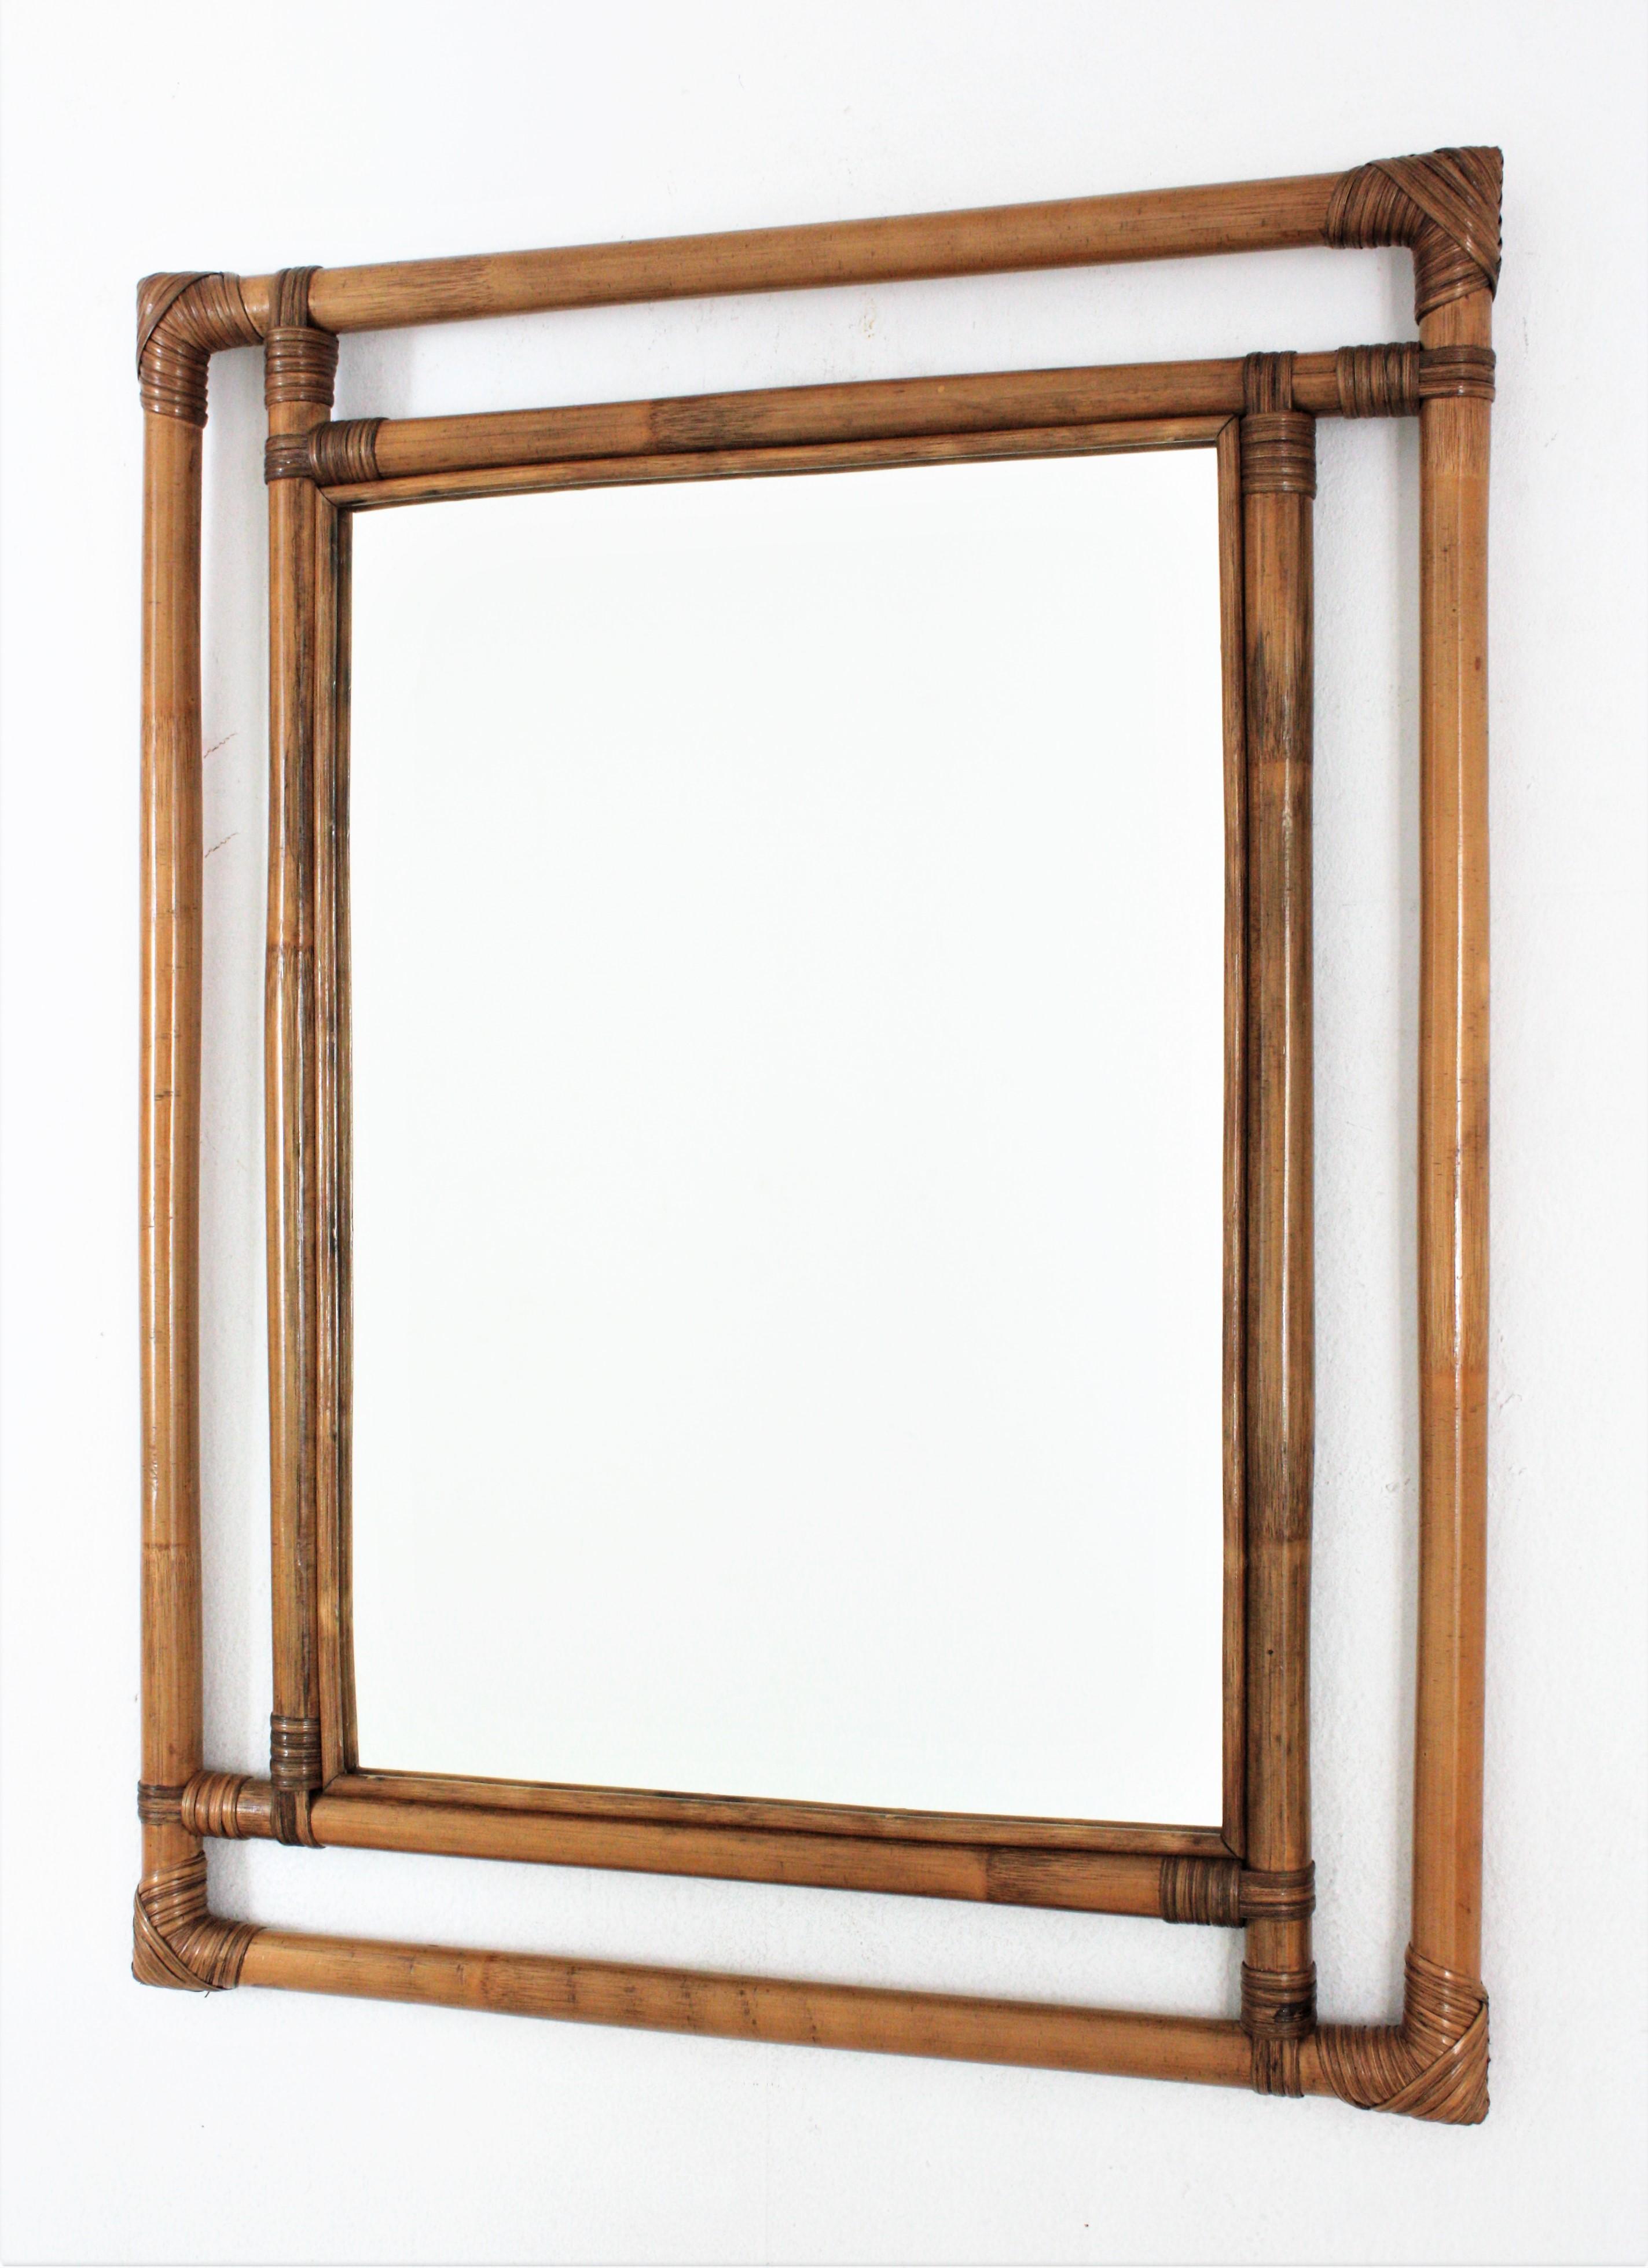 Bamboo Rattan Large Rectangular Mirror with Geometric Frame, 1960s  For Sale 3